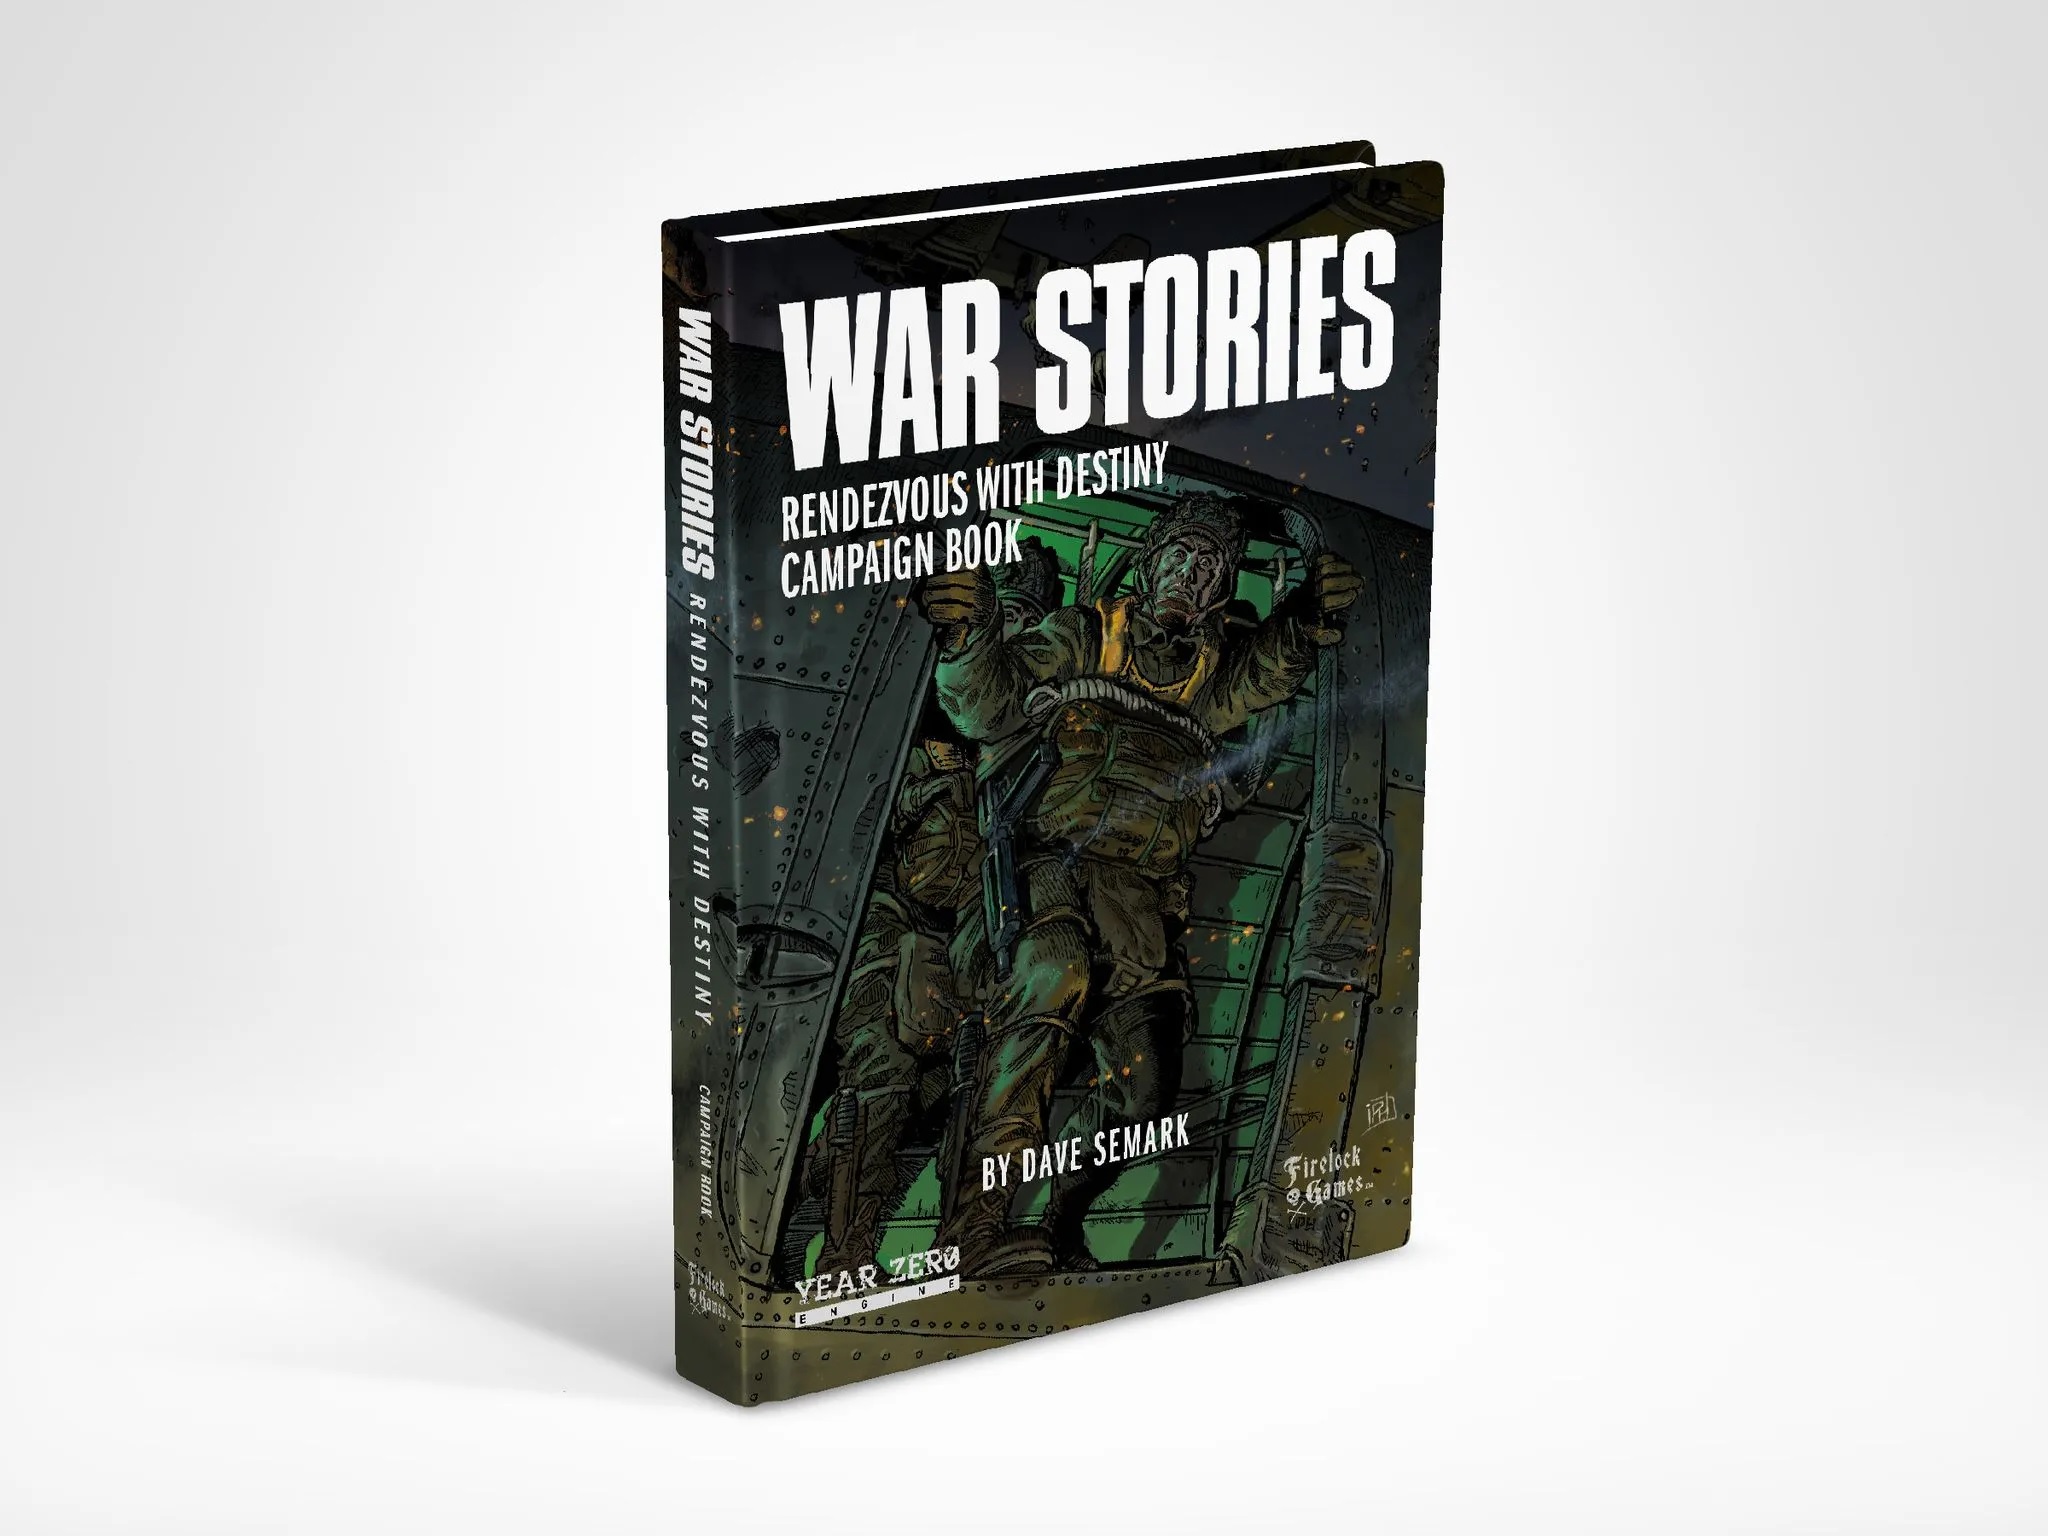 War Stories Campaign Book: Rendezvous with Destiny